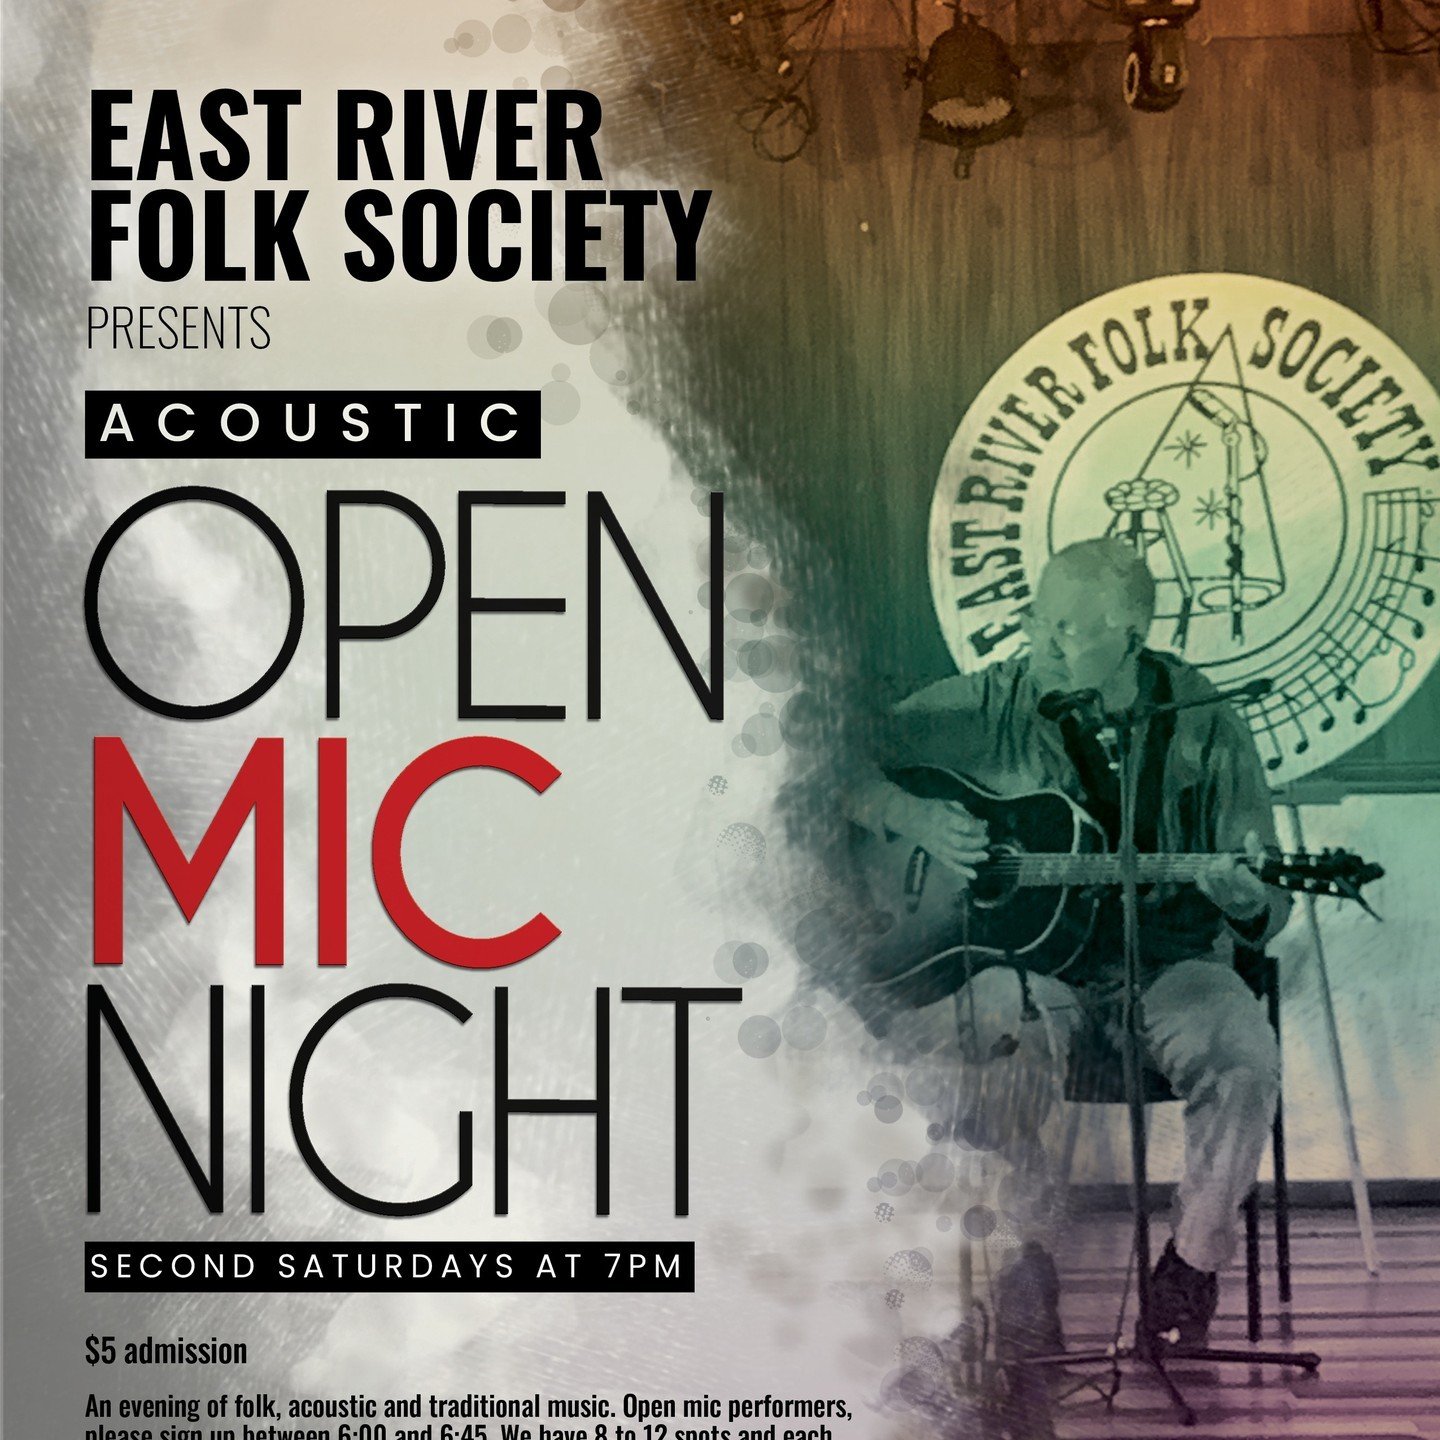 The next East River Folk Society Acoustic Open Mic Night is this Saturday, May 11! You&rsquo;ll be in for an evening of folk, acoustic and traditional music starting at 7:00pm. Open mic performers, please sign up between 6:00 and 6:45. We have 8 to 1